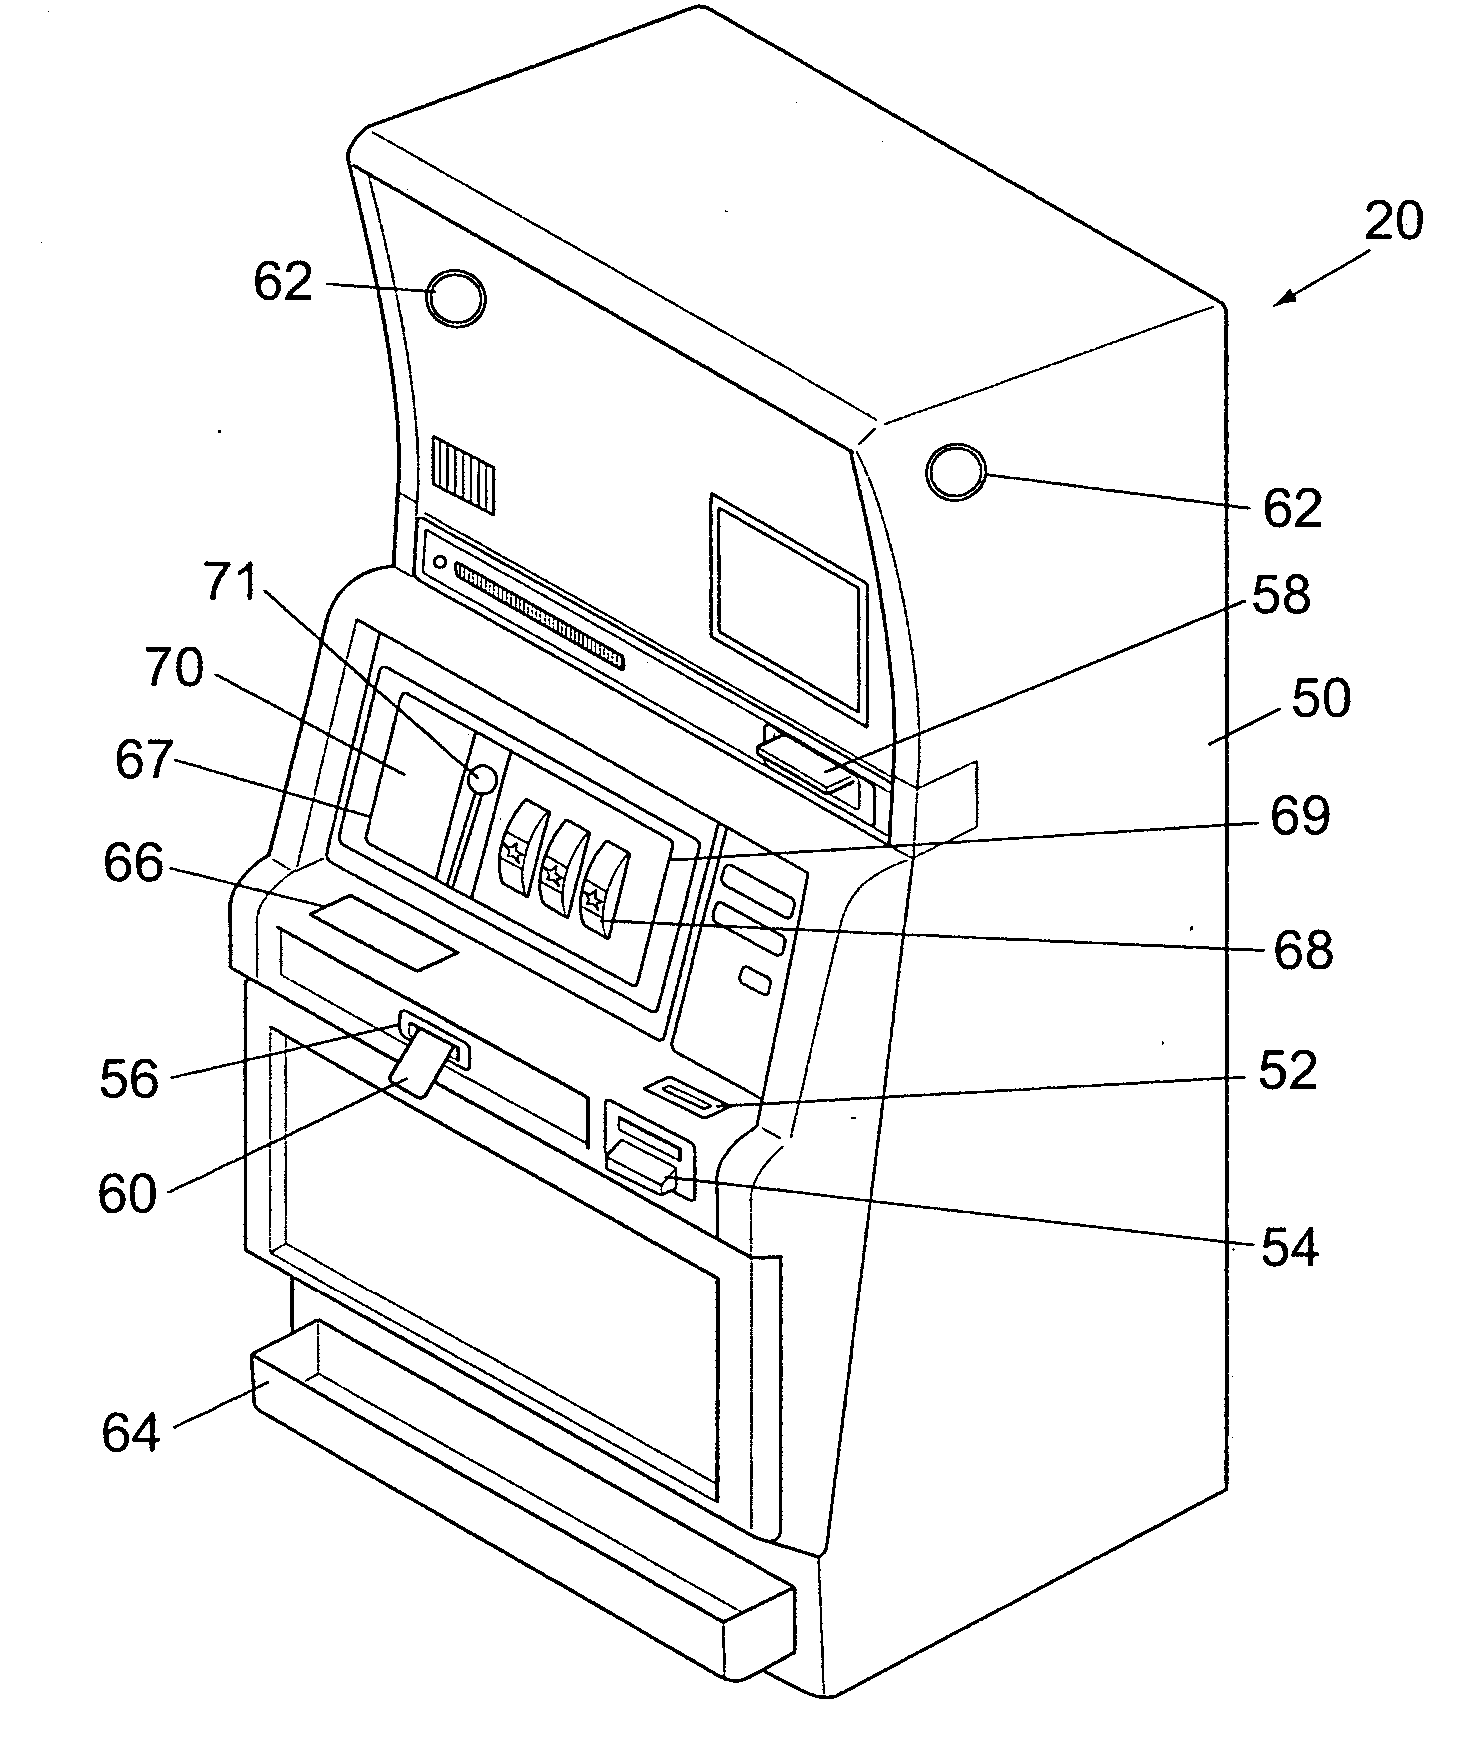 Method and apparatus for using a light valve to reduce the visibility of an object within a gaming apparatus